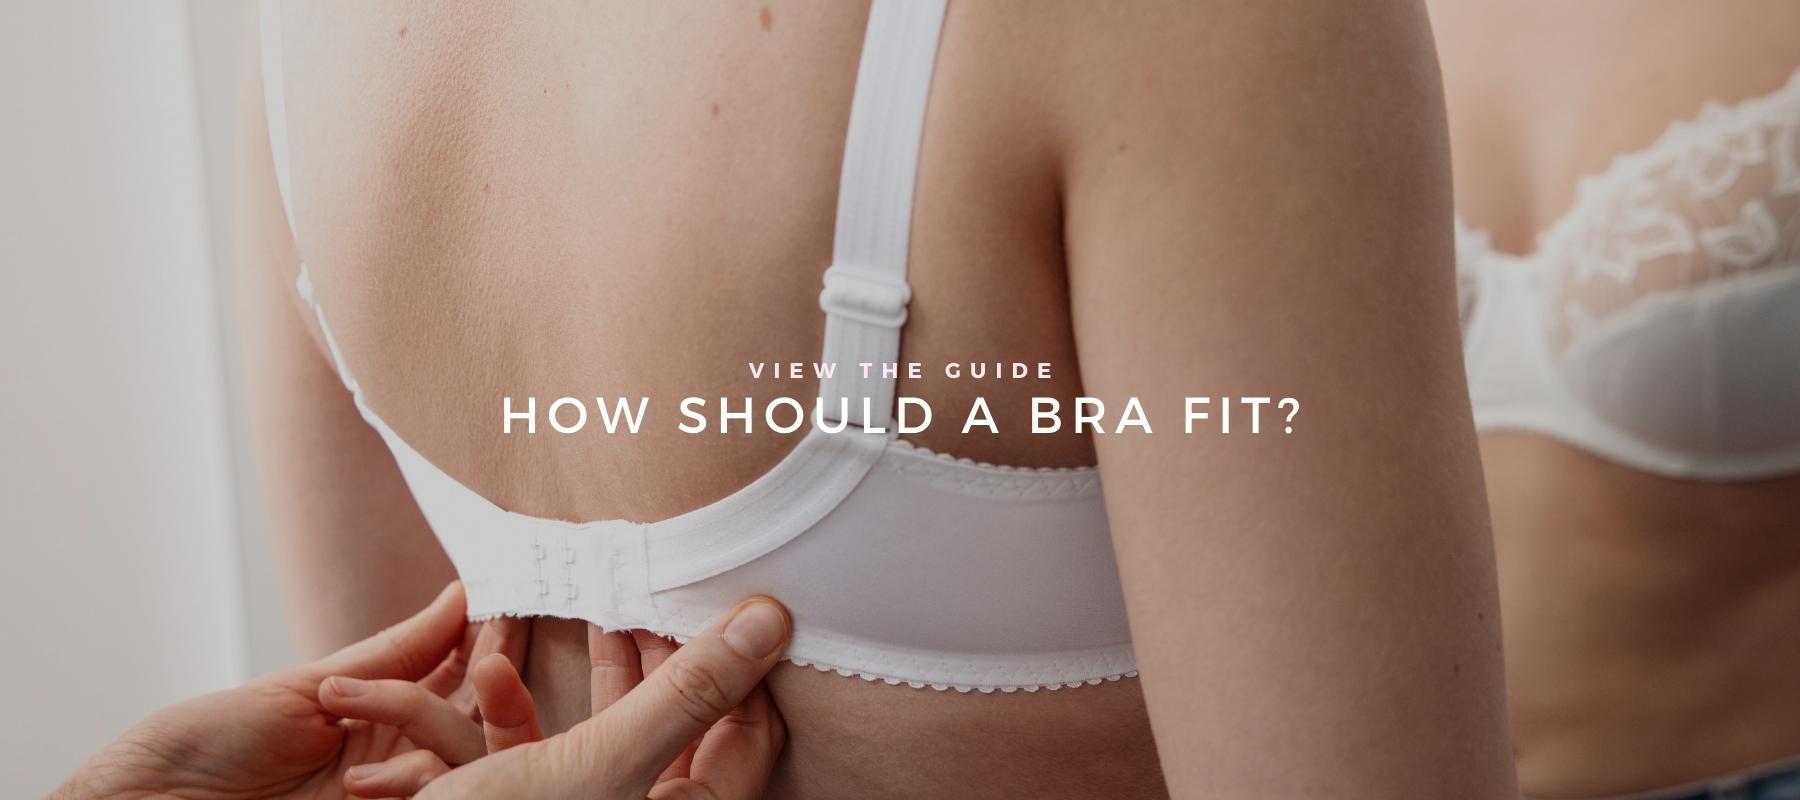 Essential Bodywear can make a difference with just the right bra